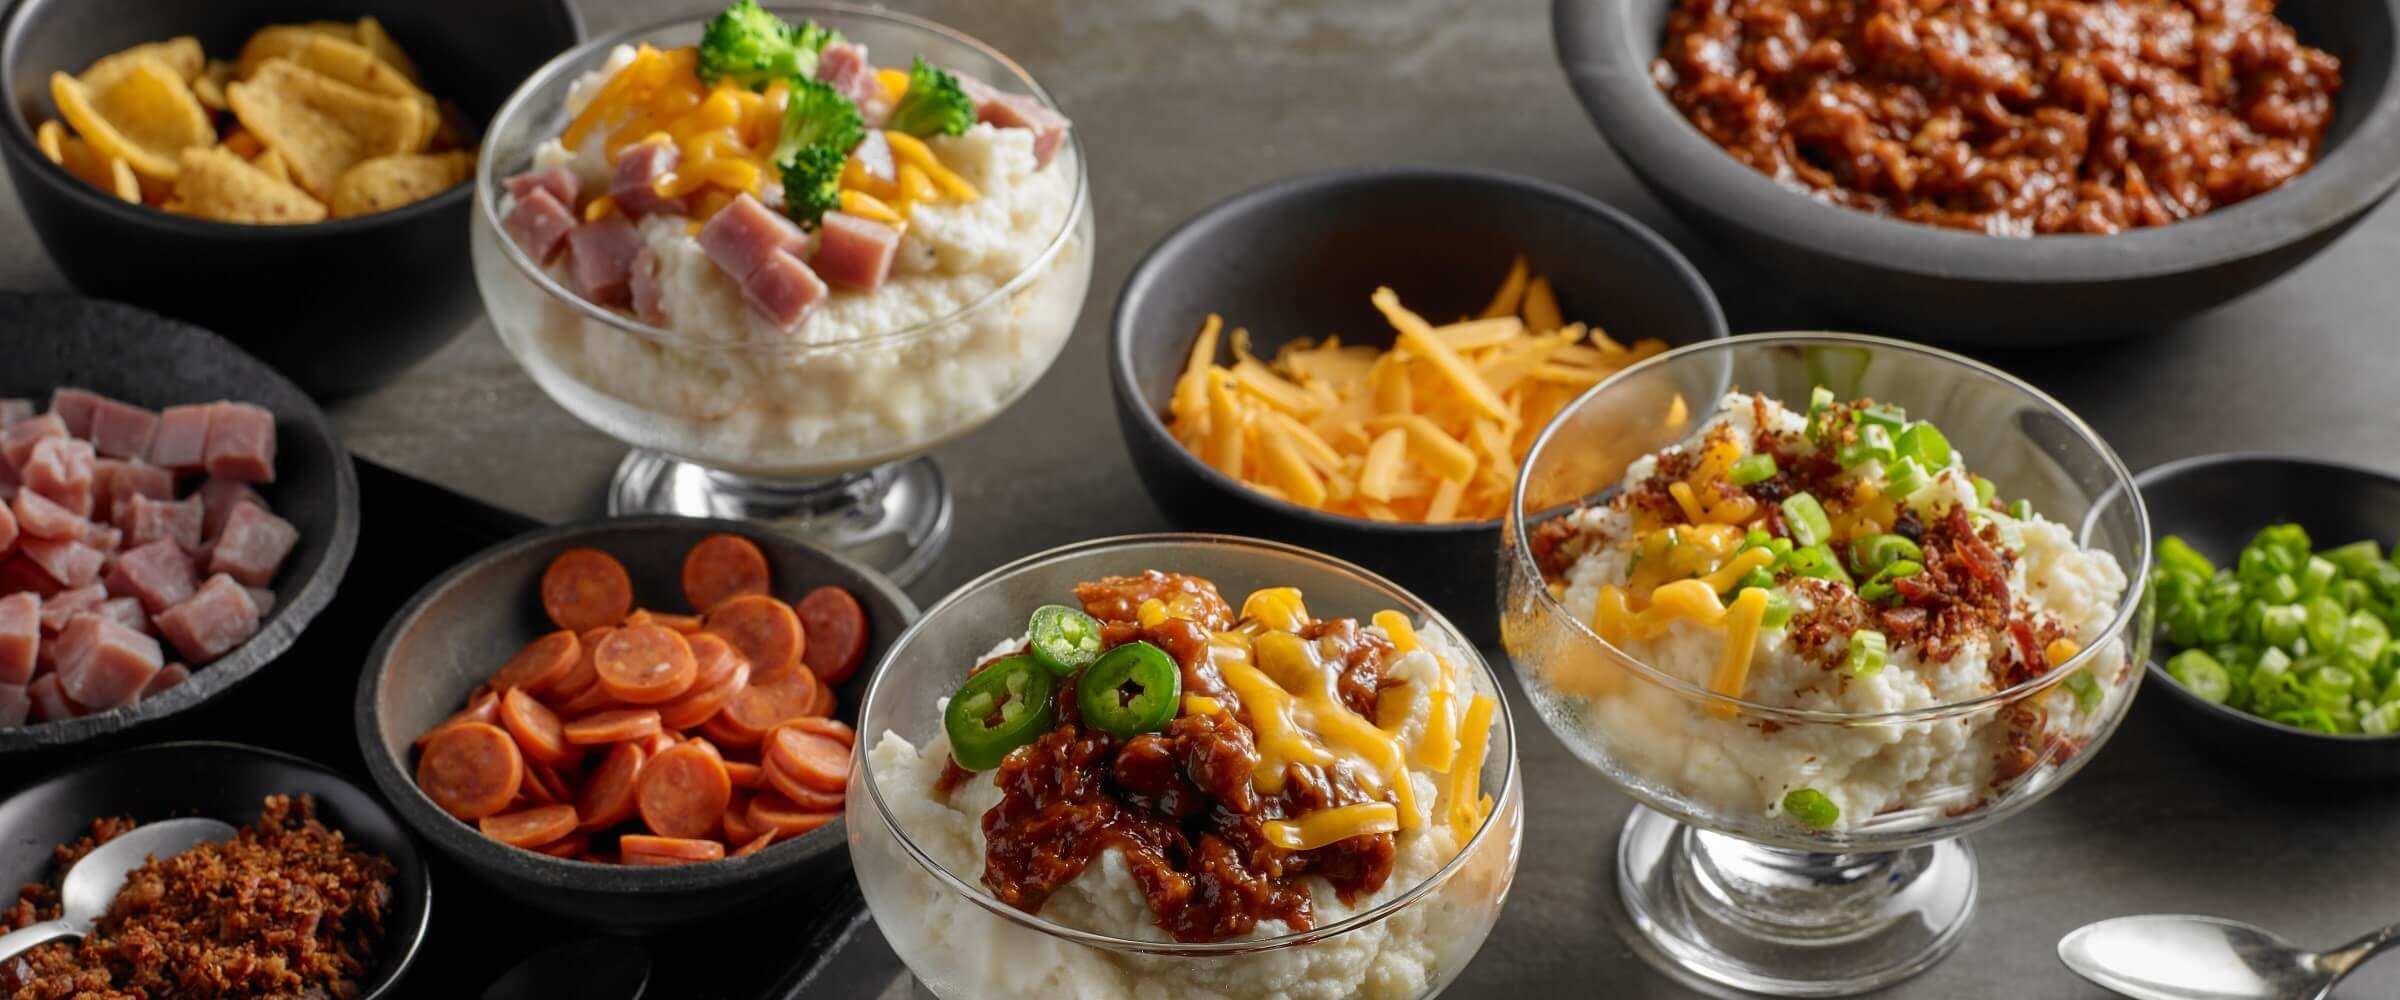 BBQ mashed potato bar spread with toppings in small bowls including pepperoni, cheese, ham, bacon bits and green onions